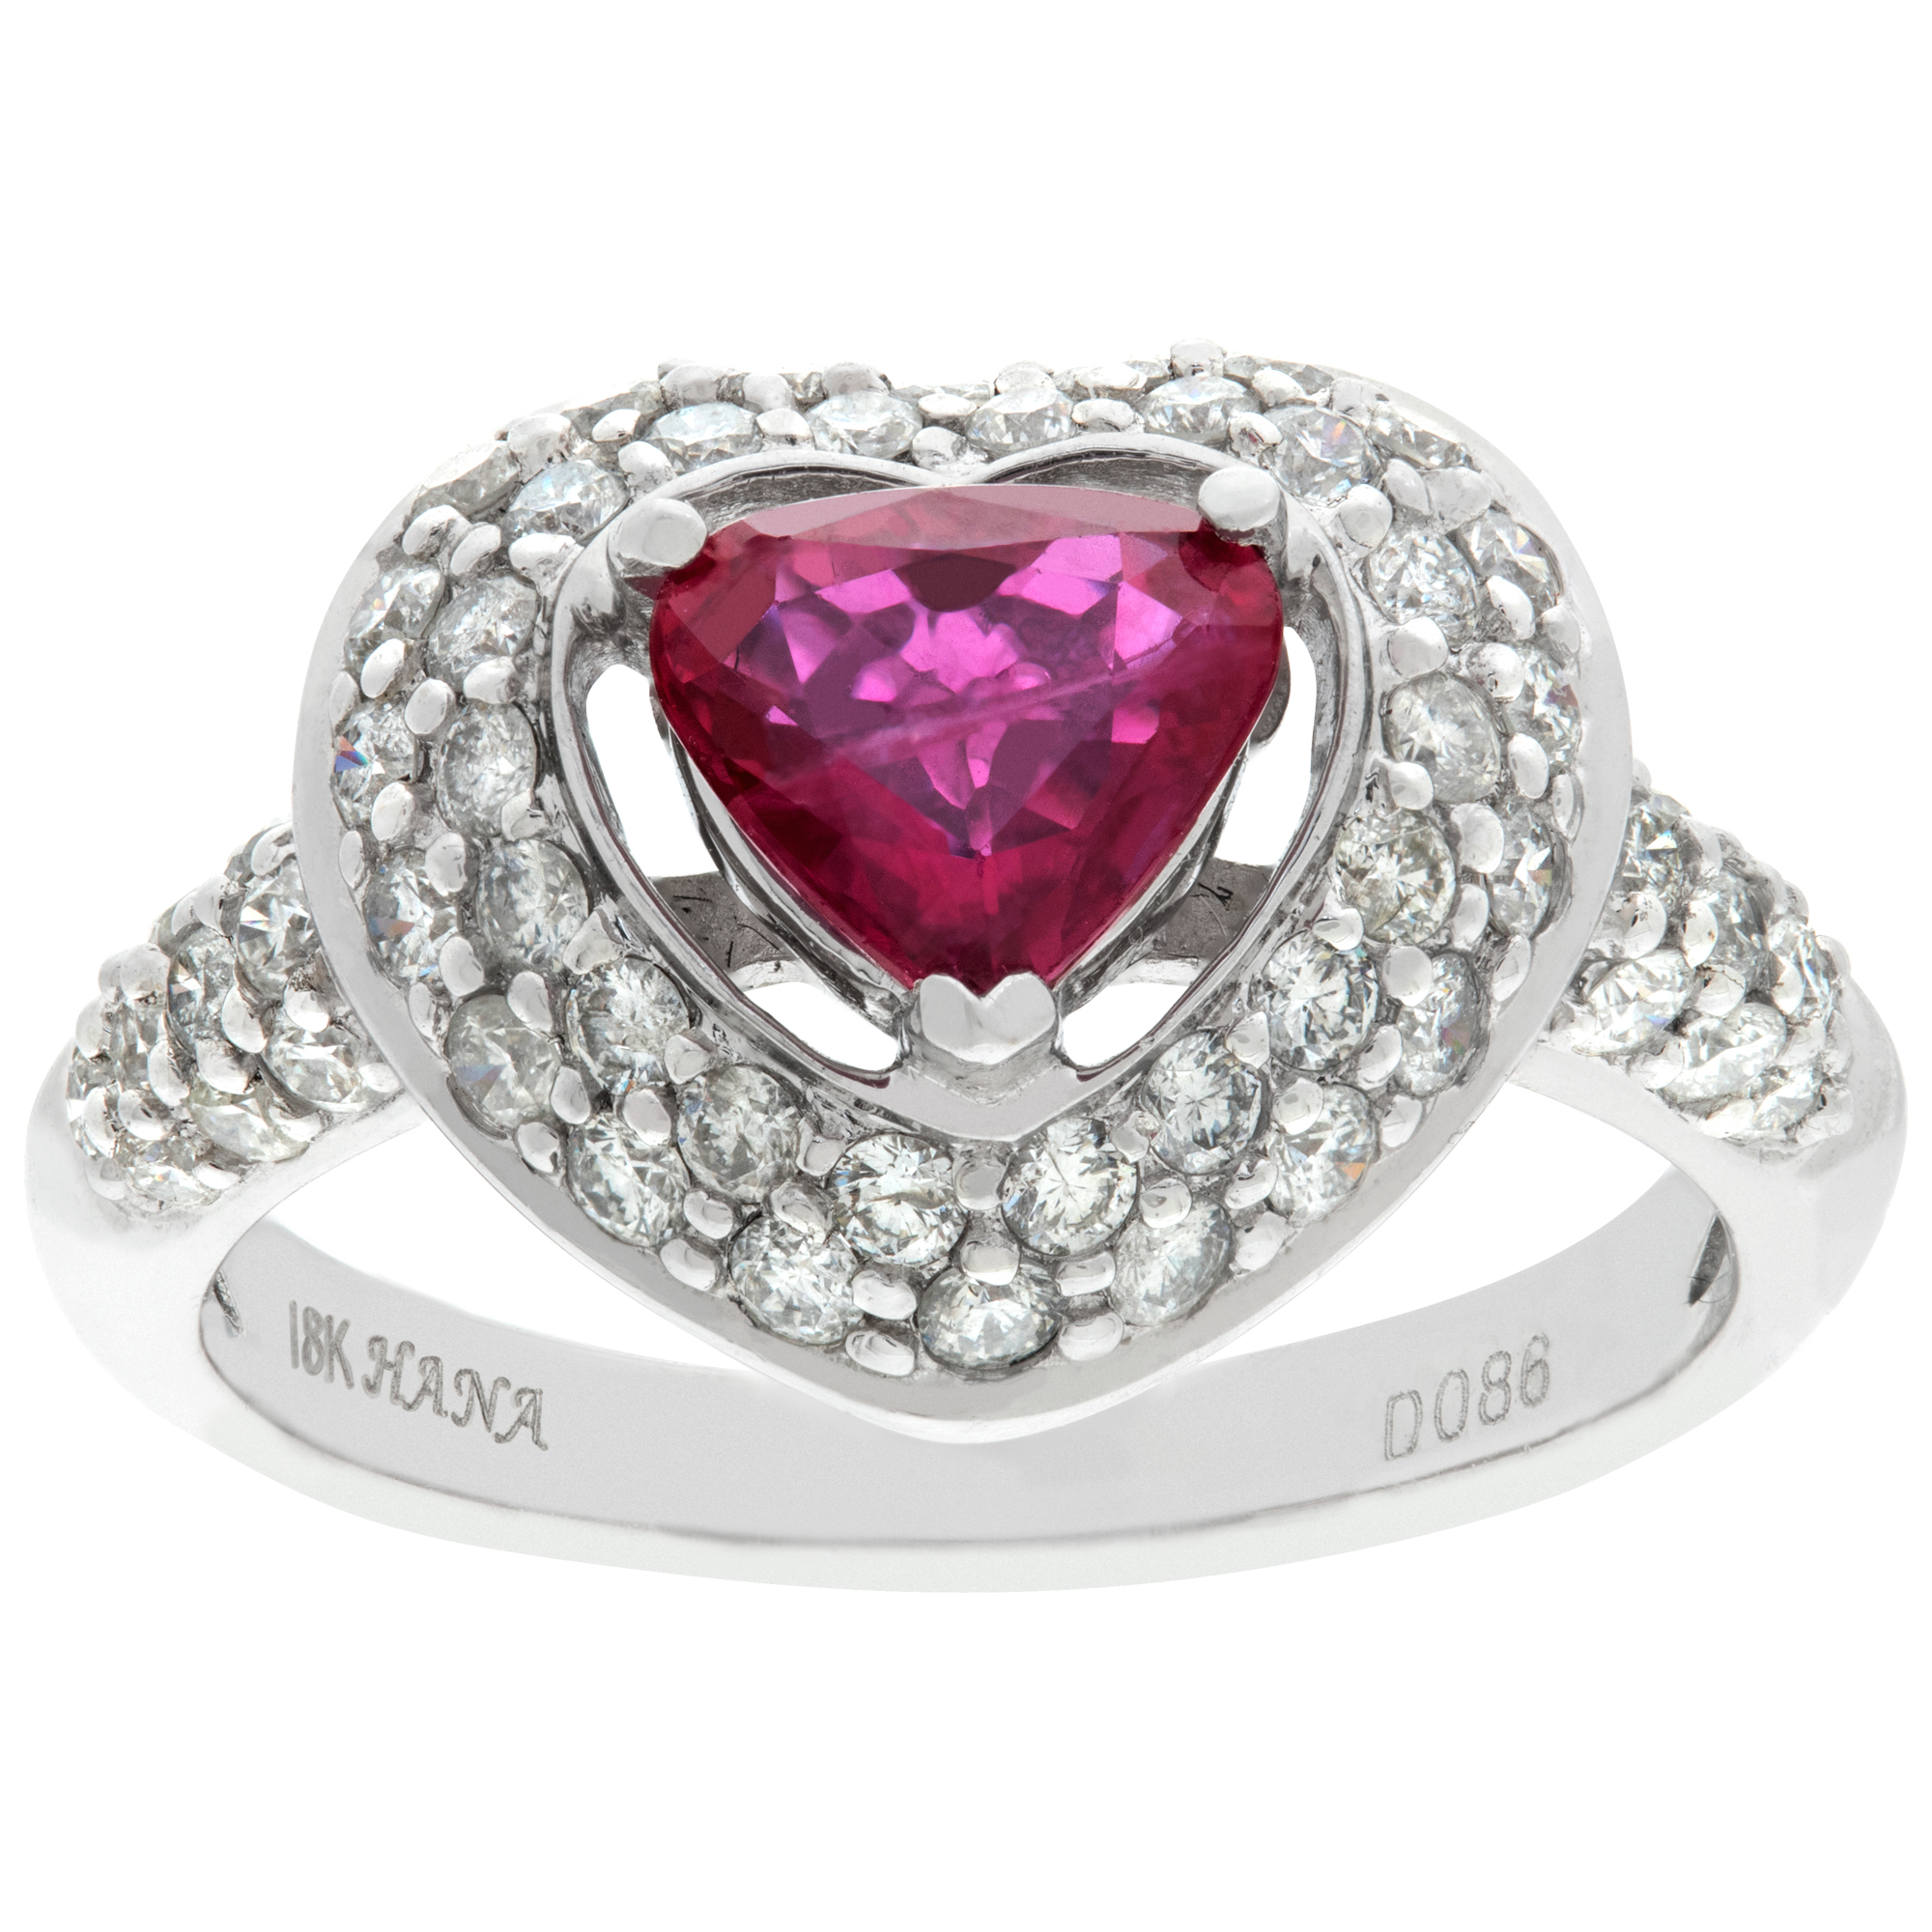 Heart shaped ring with center ruby and surrounded by pave set diamonds in 18k white gold